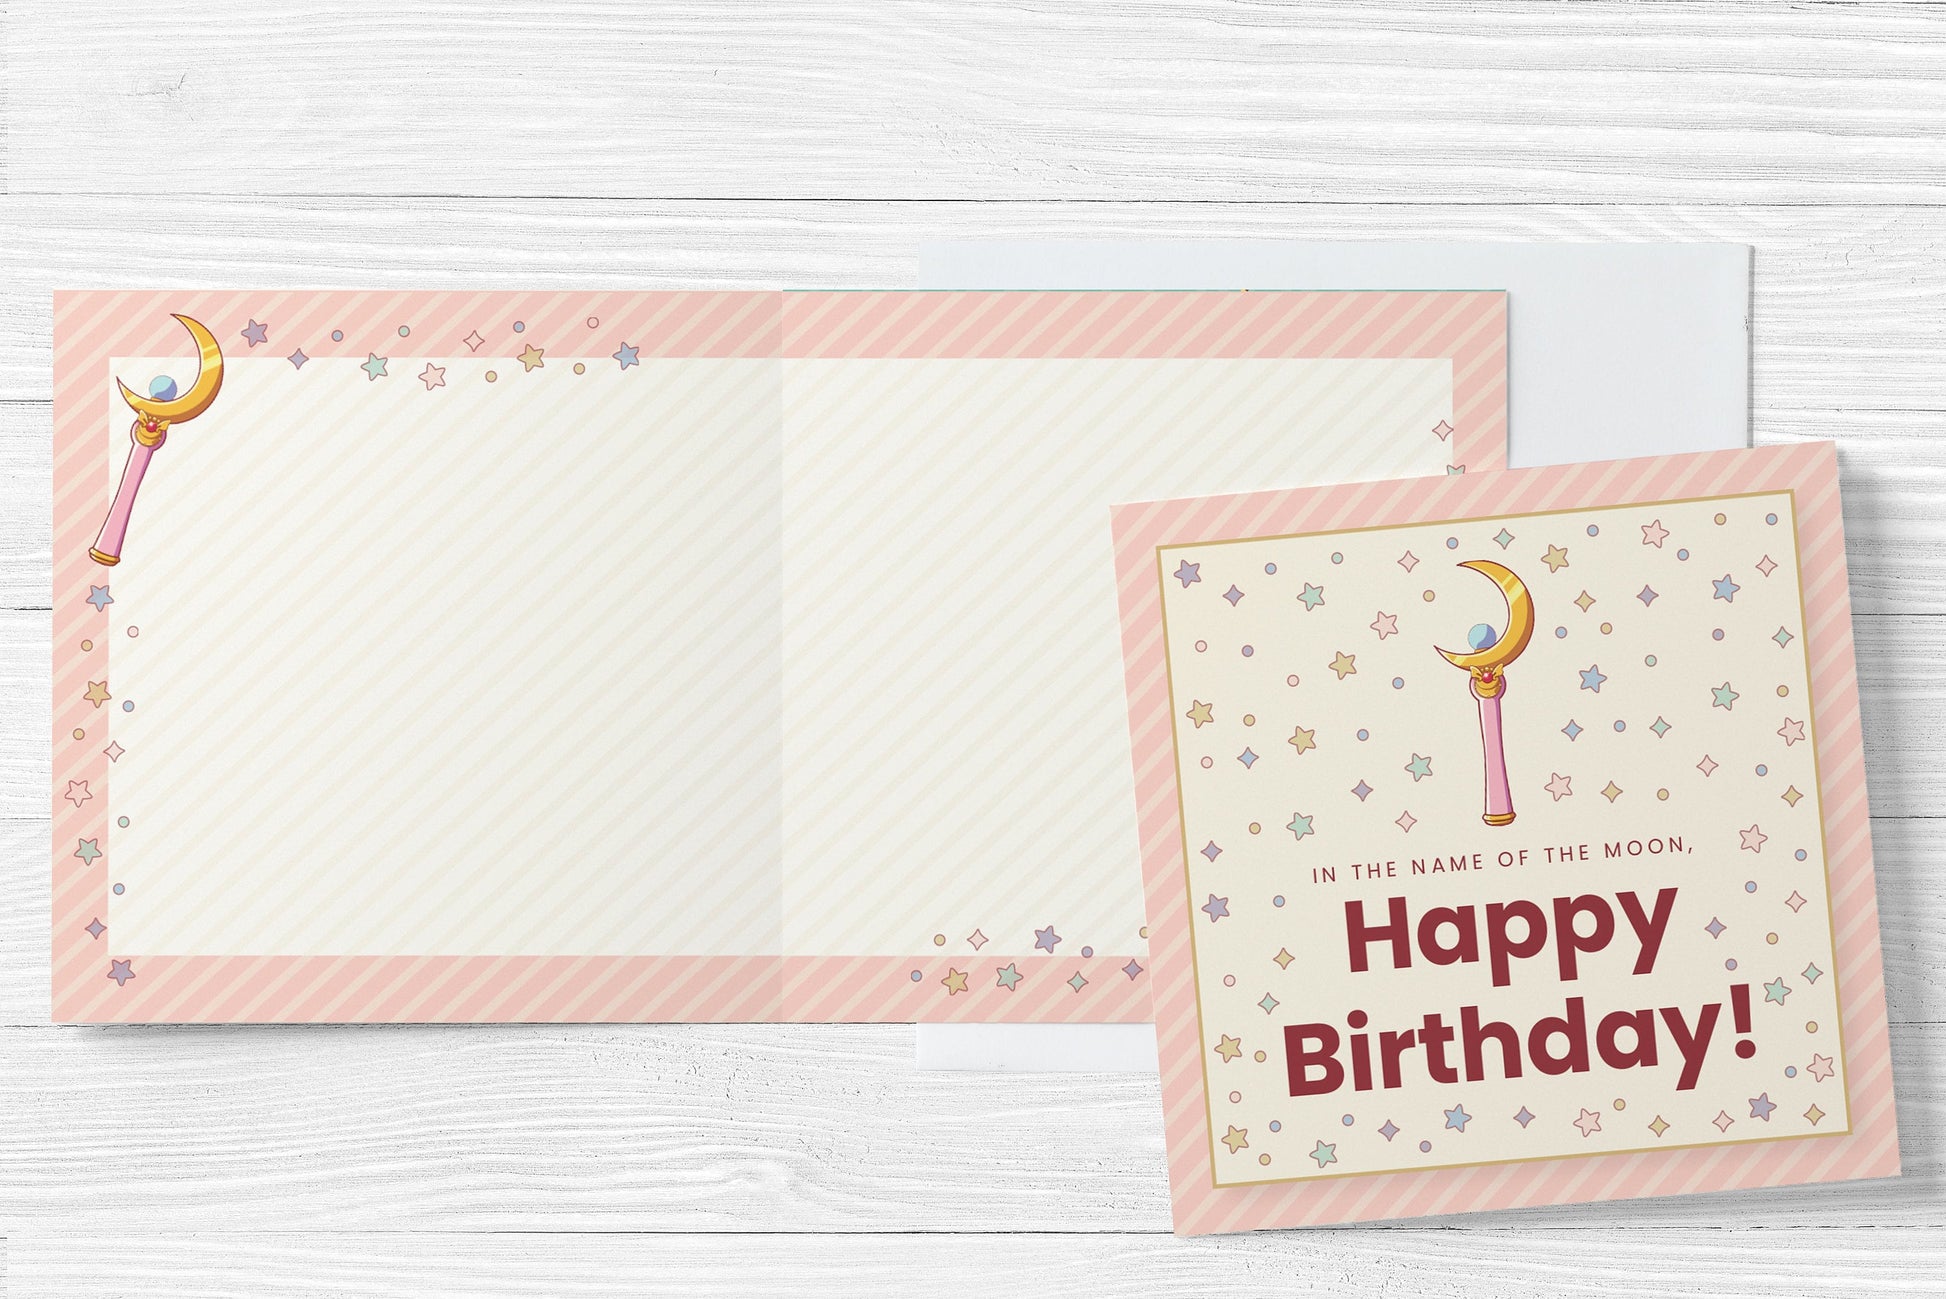 Moonie Birthday Greeting Card | .5" Foil-Matte Square with Blank Envelope | Unique Birthday Greeting & Personal Touch Gift